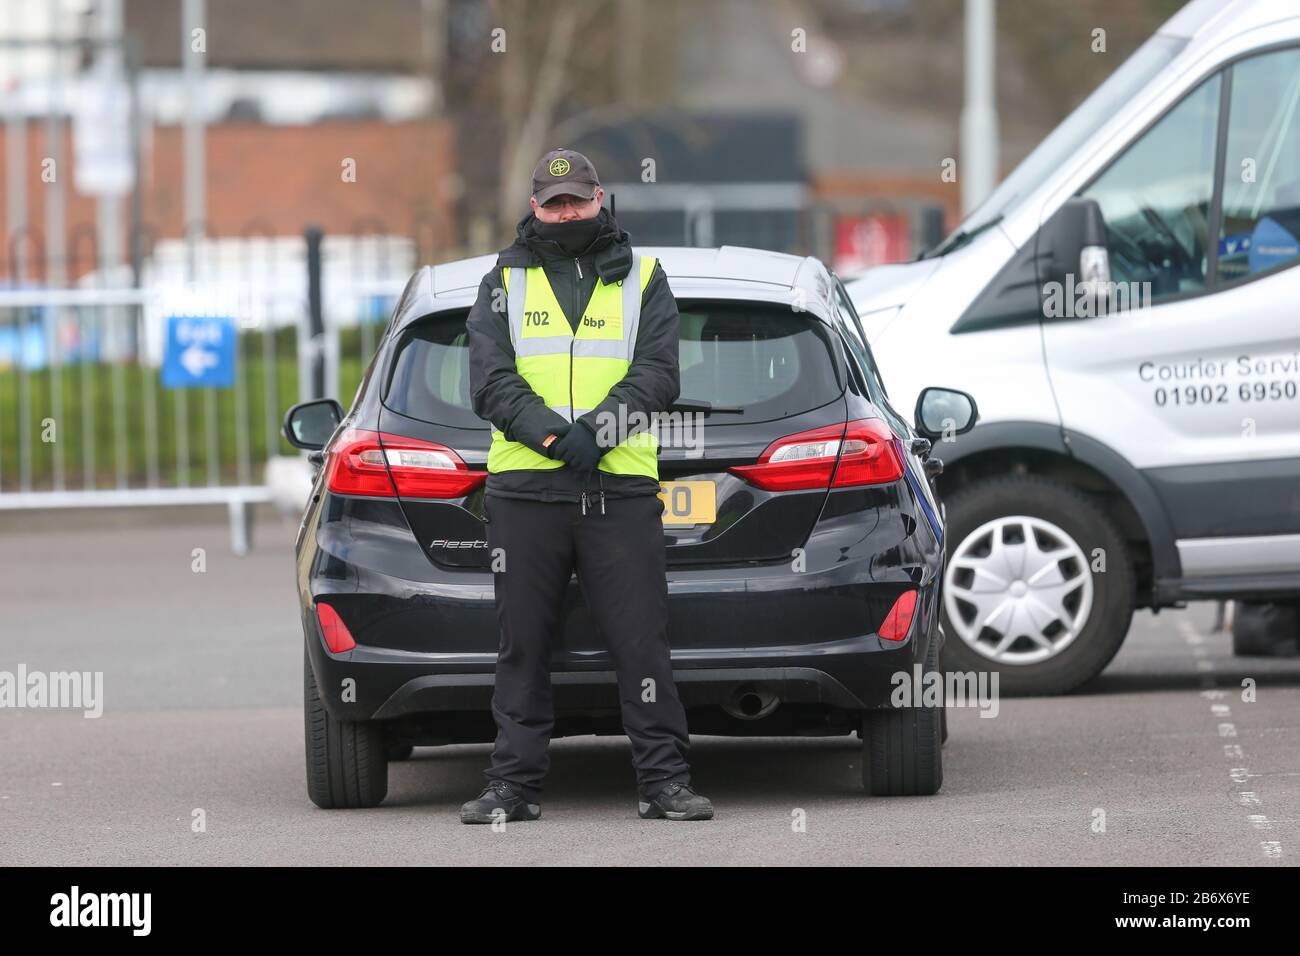 Wolverhampton, West Midlands, UK. 12th Mar, 2020. A drive-through test centre for Coronavirus COVID-19 has been set up in a Wolverhampton city centre car park. The mobile test centre is accessible by referral only, and is the first to appear in the West Midlands. Credit: Peter Lopeman/Alamy Live News Stock Photo